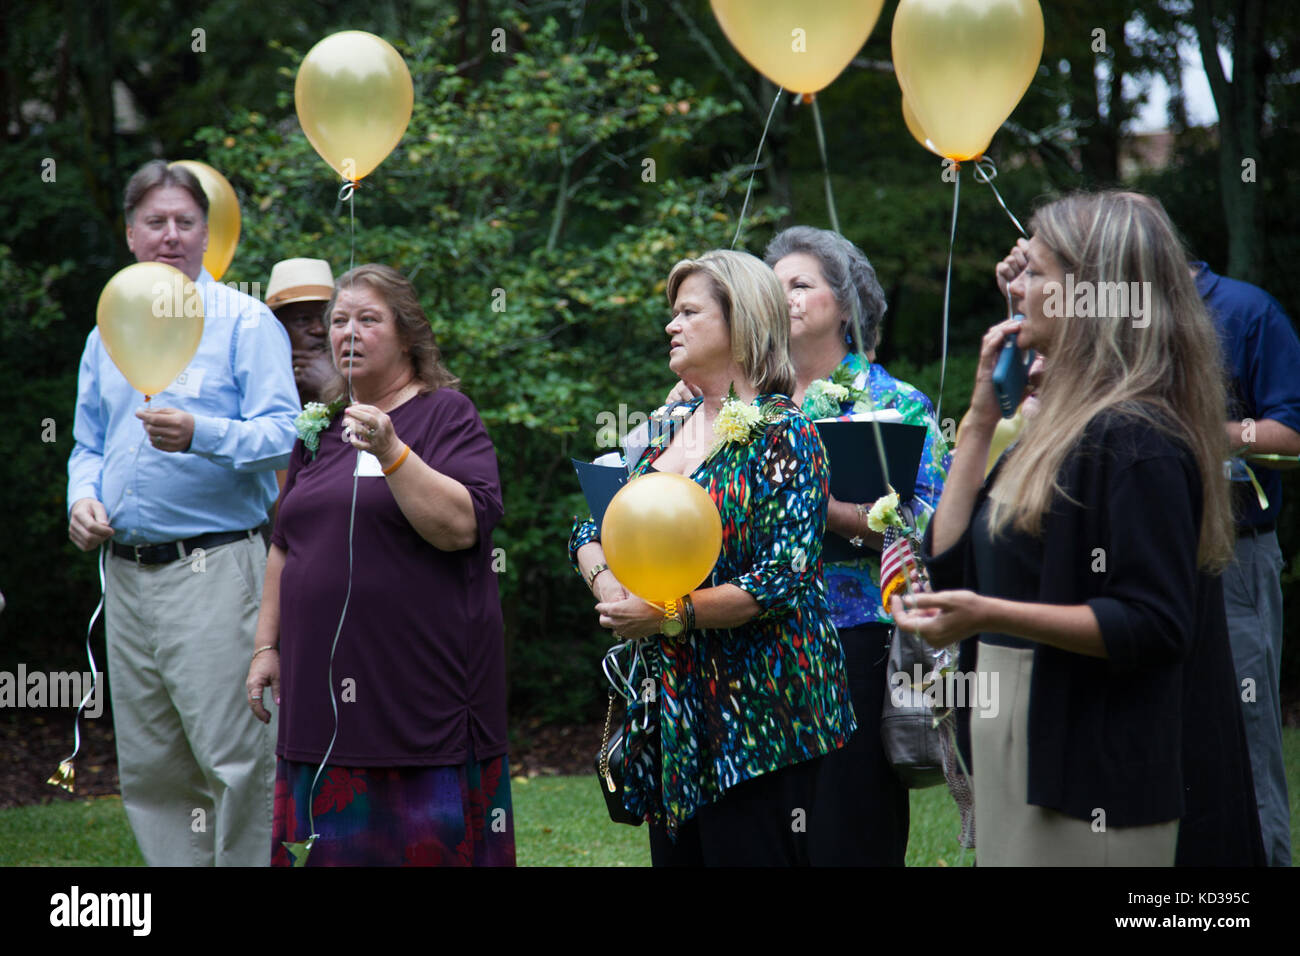 Gold Star Mothers and Families were honored during a gathering at the S.C. Governor’s Mansion Complex, Sept. 26, 2015. U.S. Army Brig. Gen. Roy V. McCarty, deputy adjutant general for the S. C. National Guard, served as guest speaker for the event, which was organized by the Survivor Outreach Services of the South Carolina National Guard and Ft. Jackson. Stock Photo